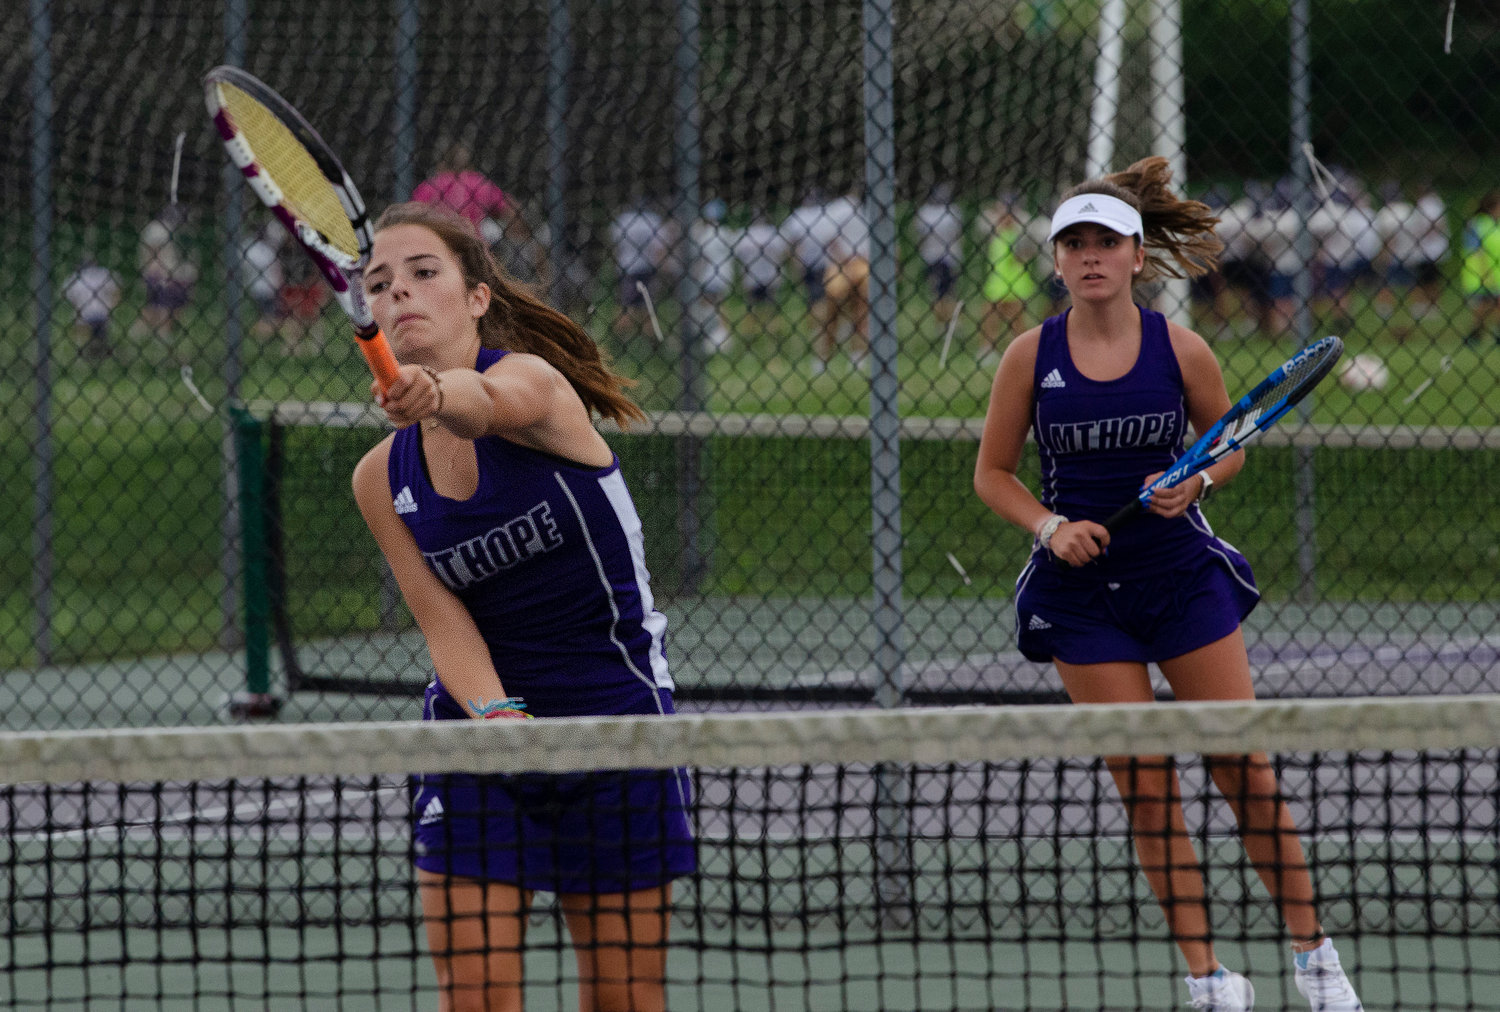 Second doubles players, Zelda Hayes (left) and Lacey Dufficy play a point during their match on Wednesday.